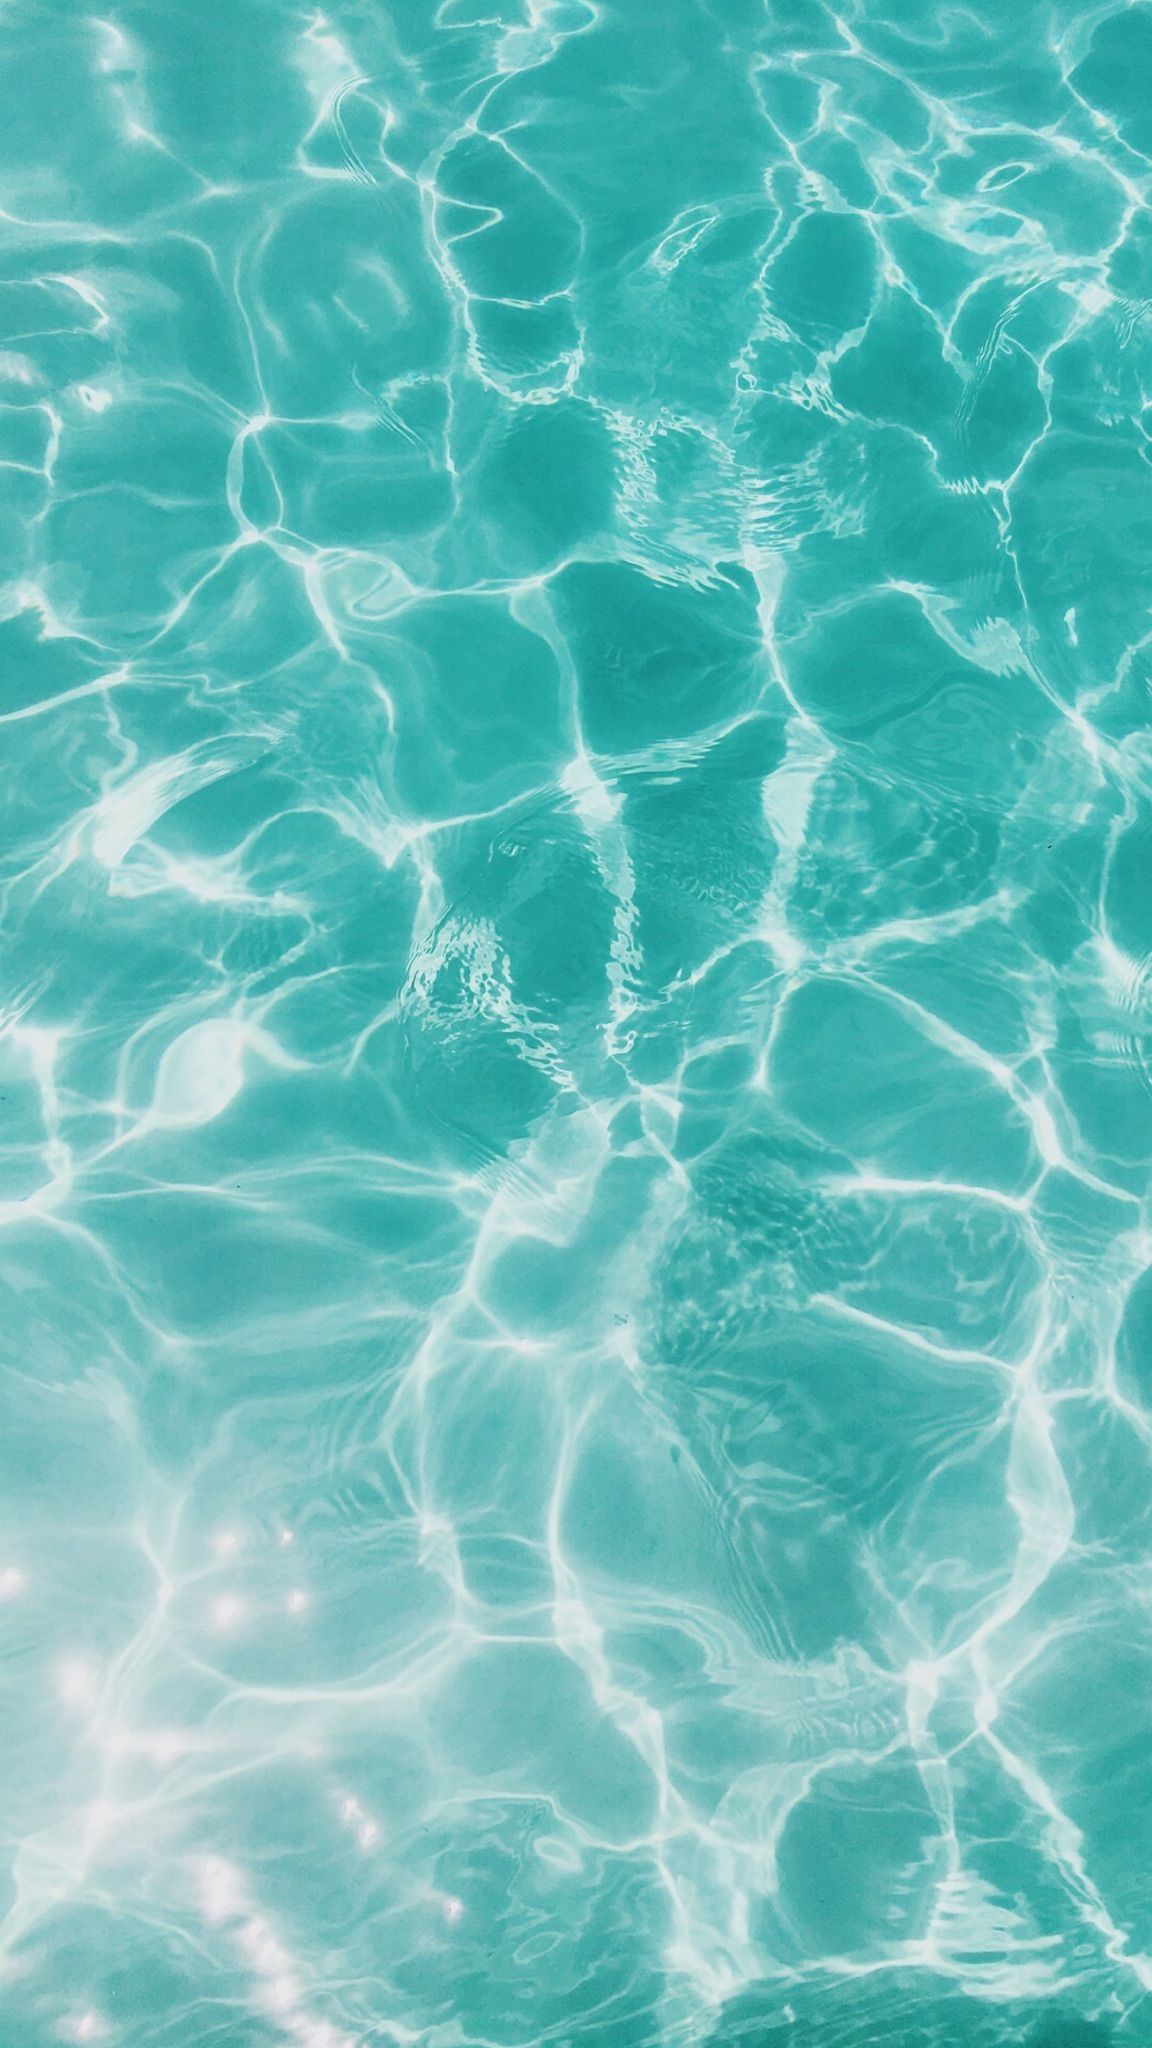 A close up of crystal clear blue water in a pool - Aqua